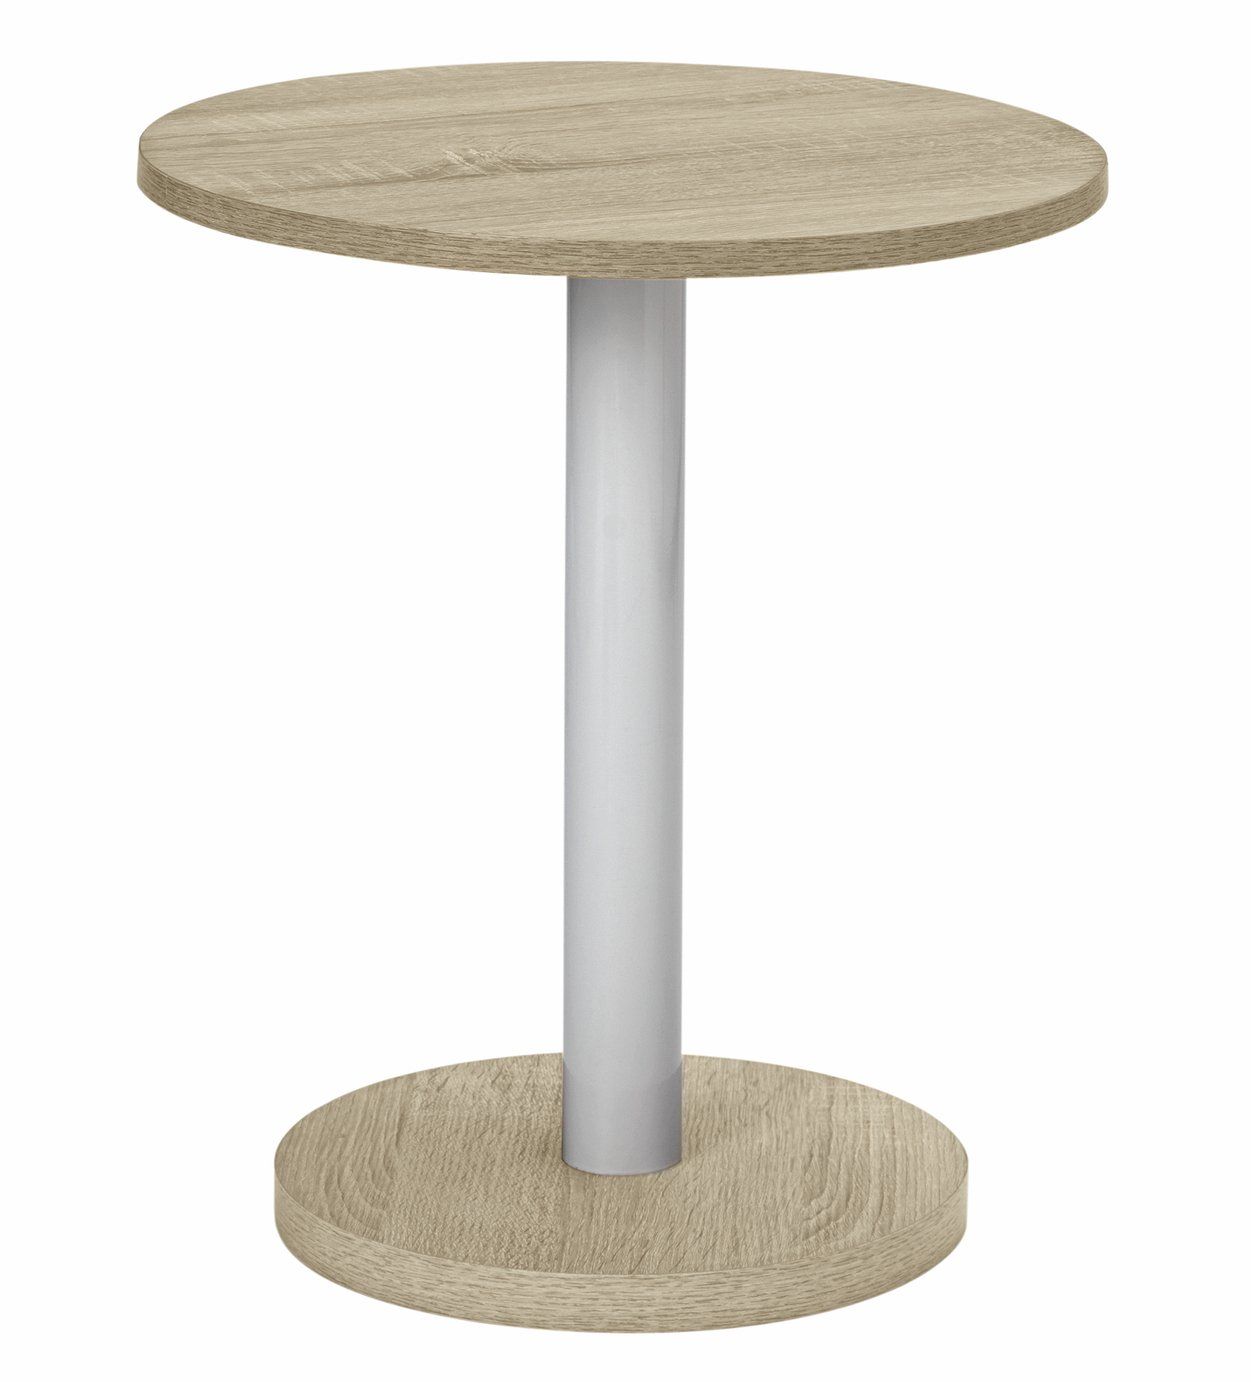 16 Small Side Tables Perfect For, Tiny Lamp Table